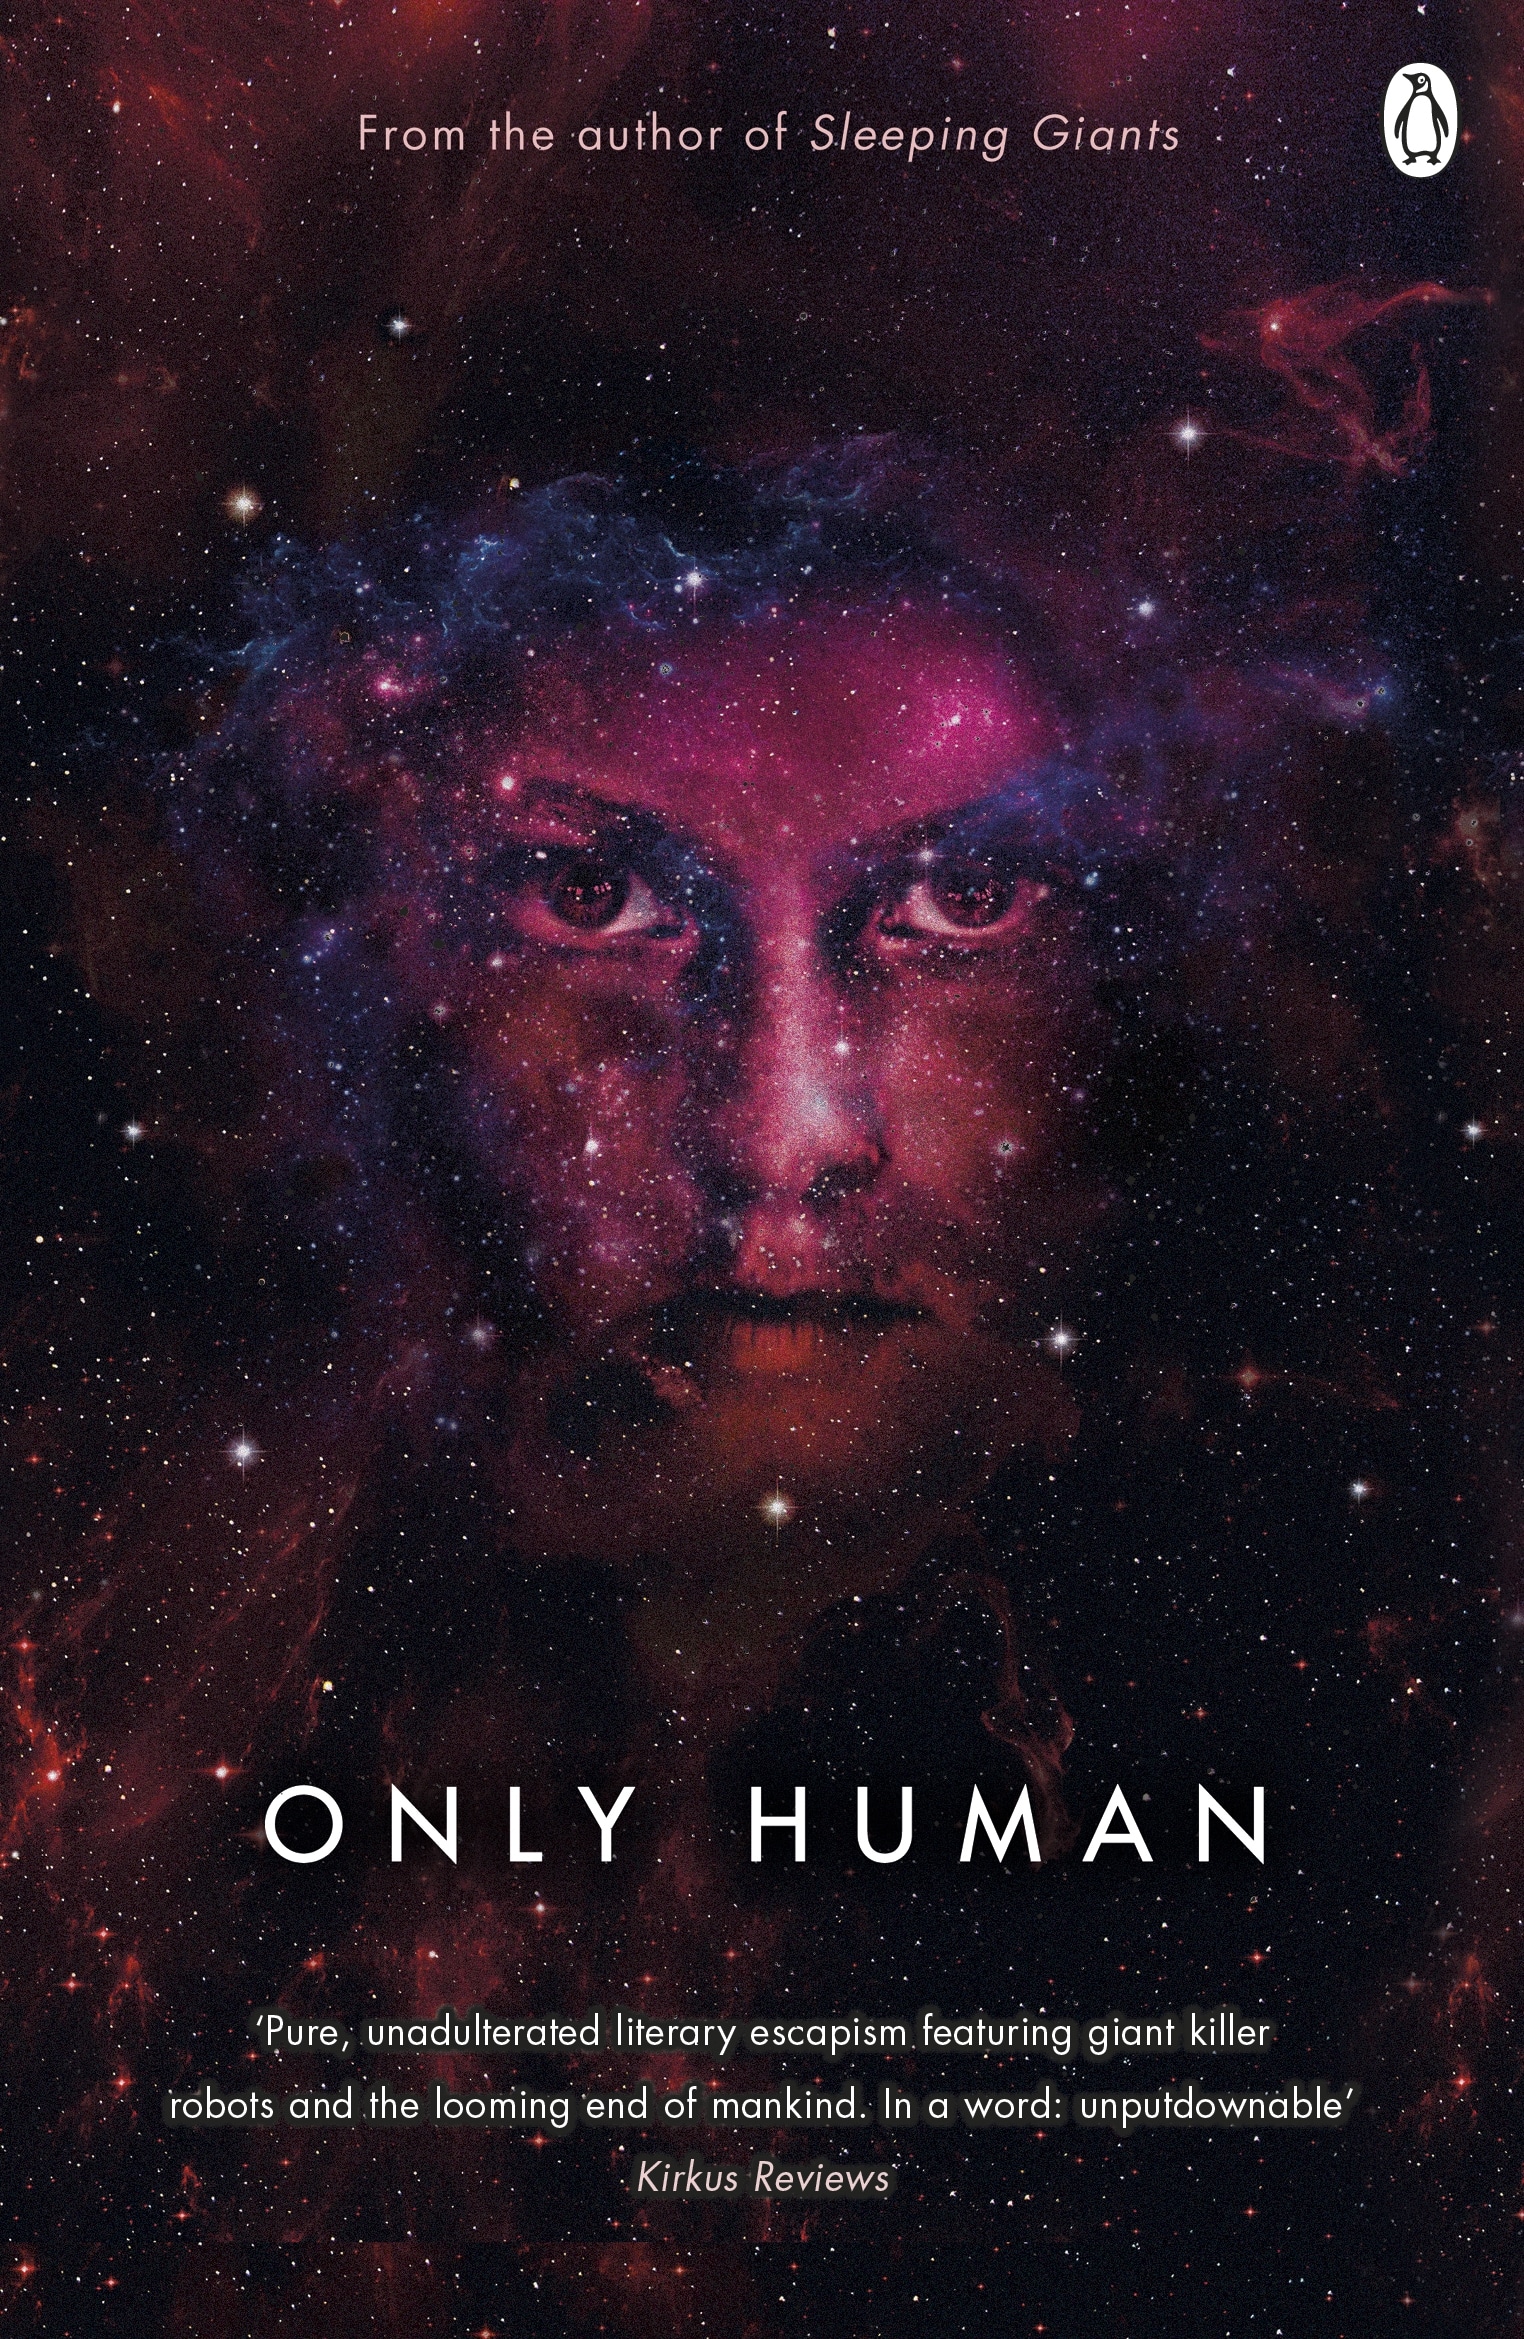 Book “Only Human” by Sylvain Neuvel — April 4, 2019